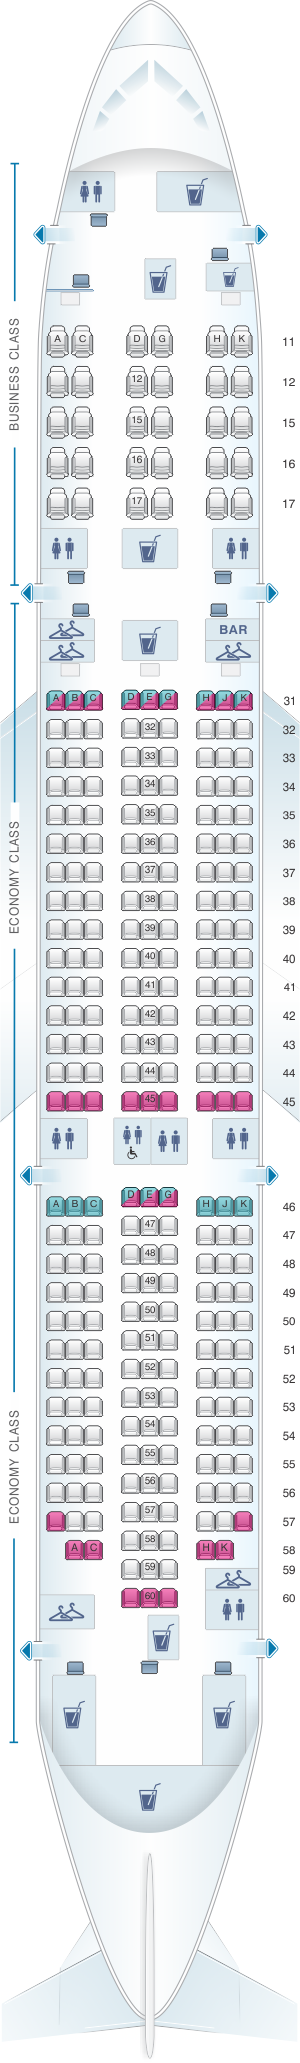 Seat map for Hainan Airlines Boeing B787-9 config.1